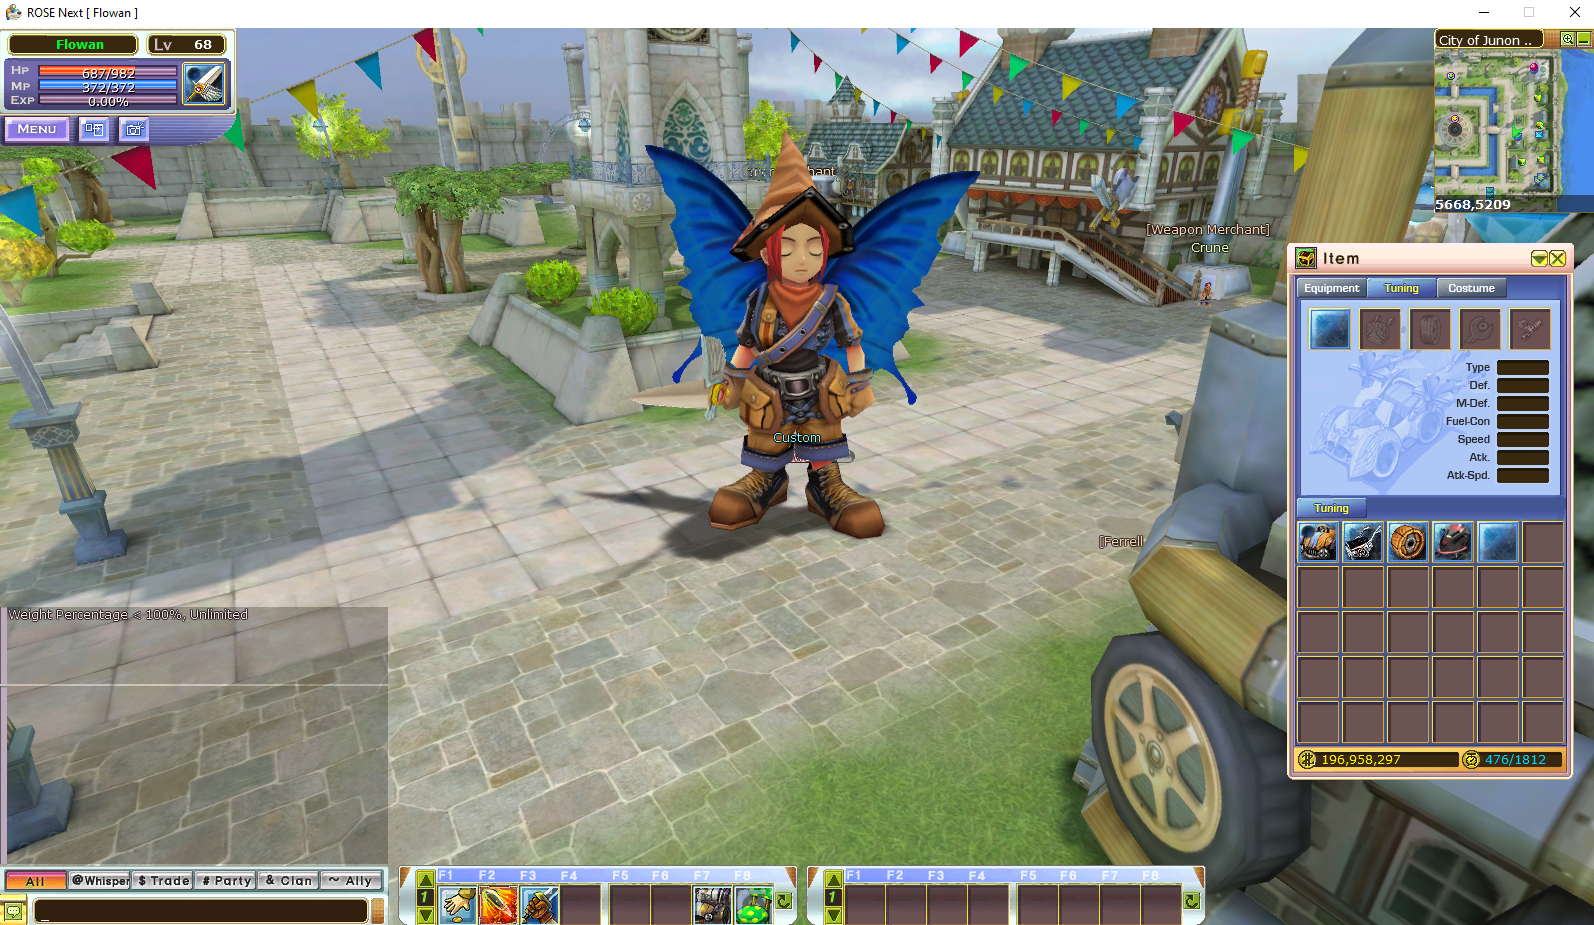 Screenshot of character set to a large size